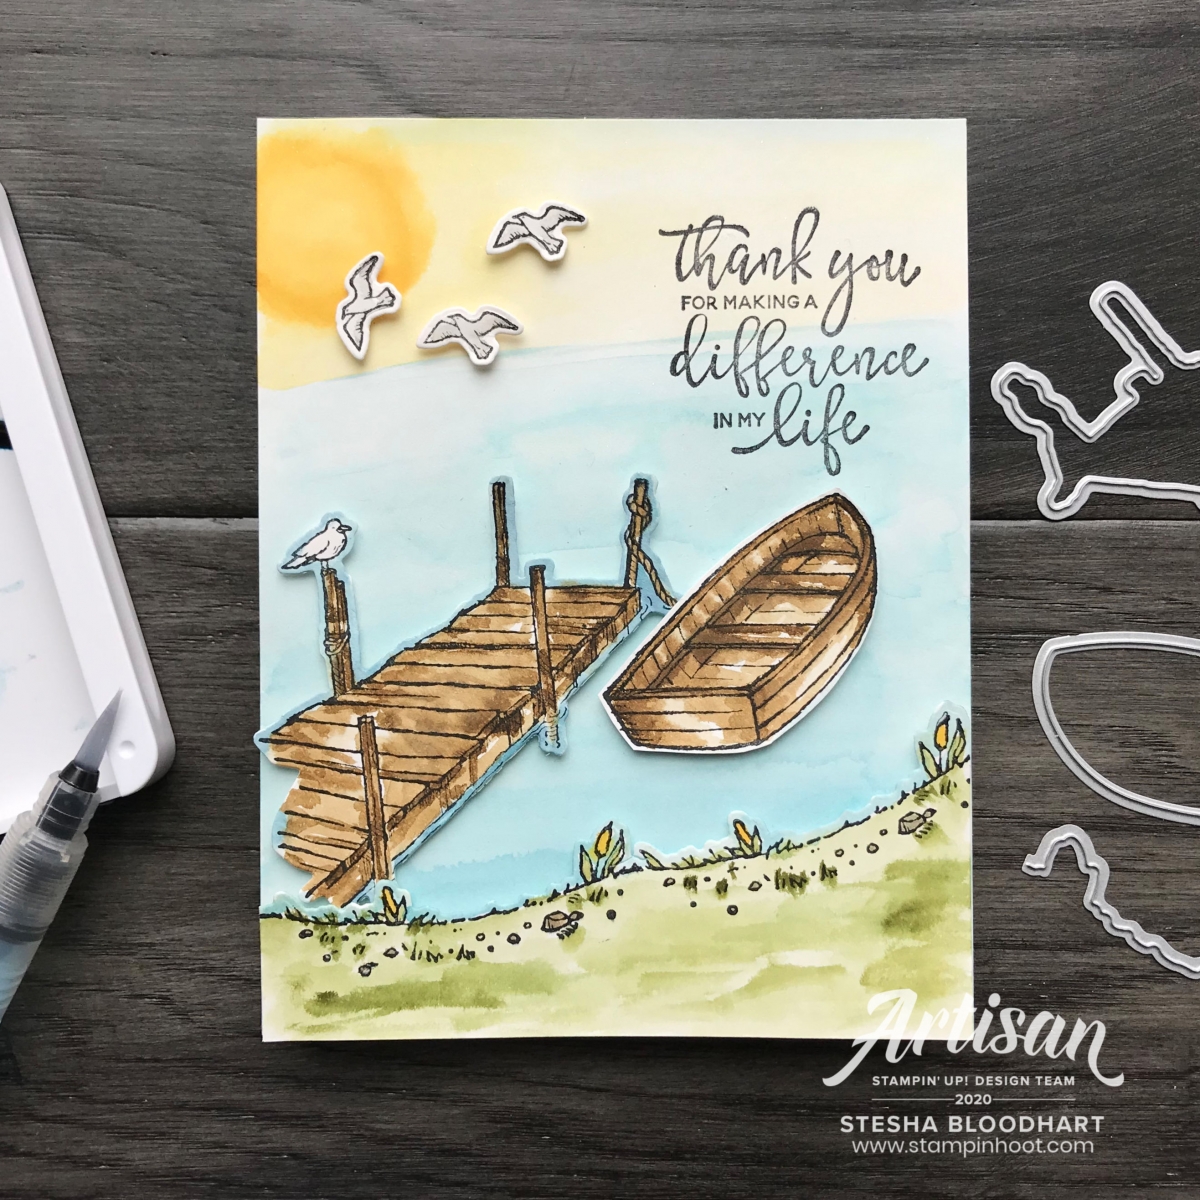 By the Dock Bundle from Stampin' Up! Card by Stesha Bloodhart, Stampin' Hoot!